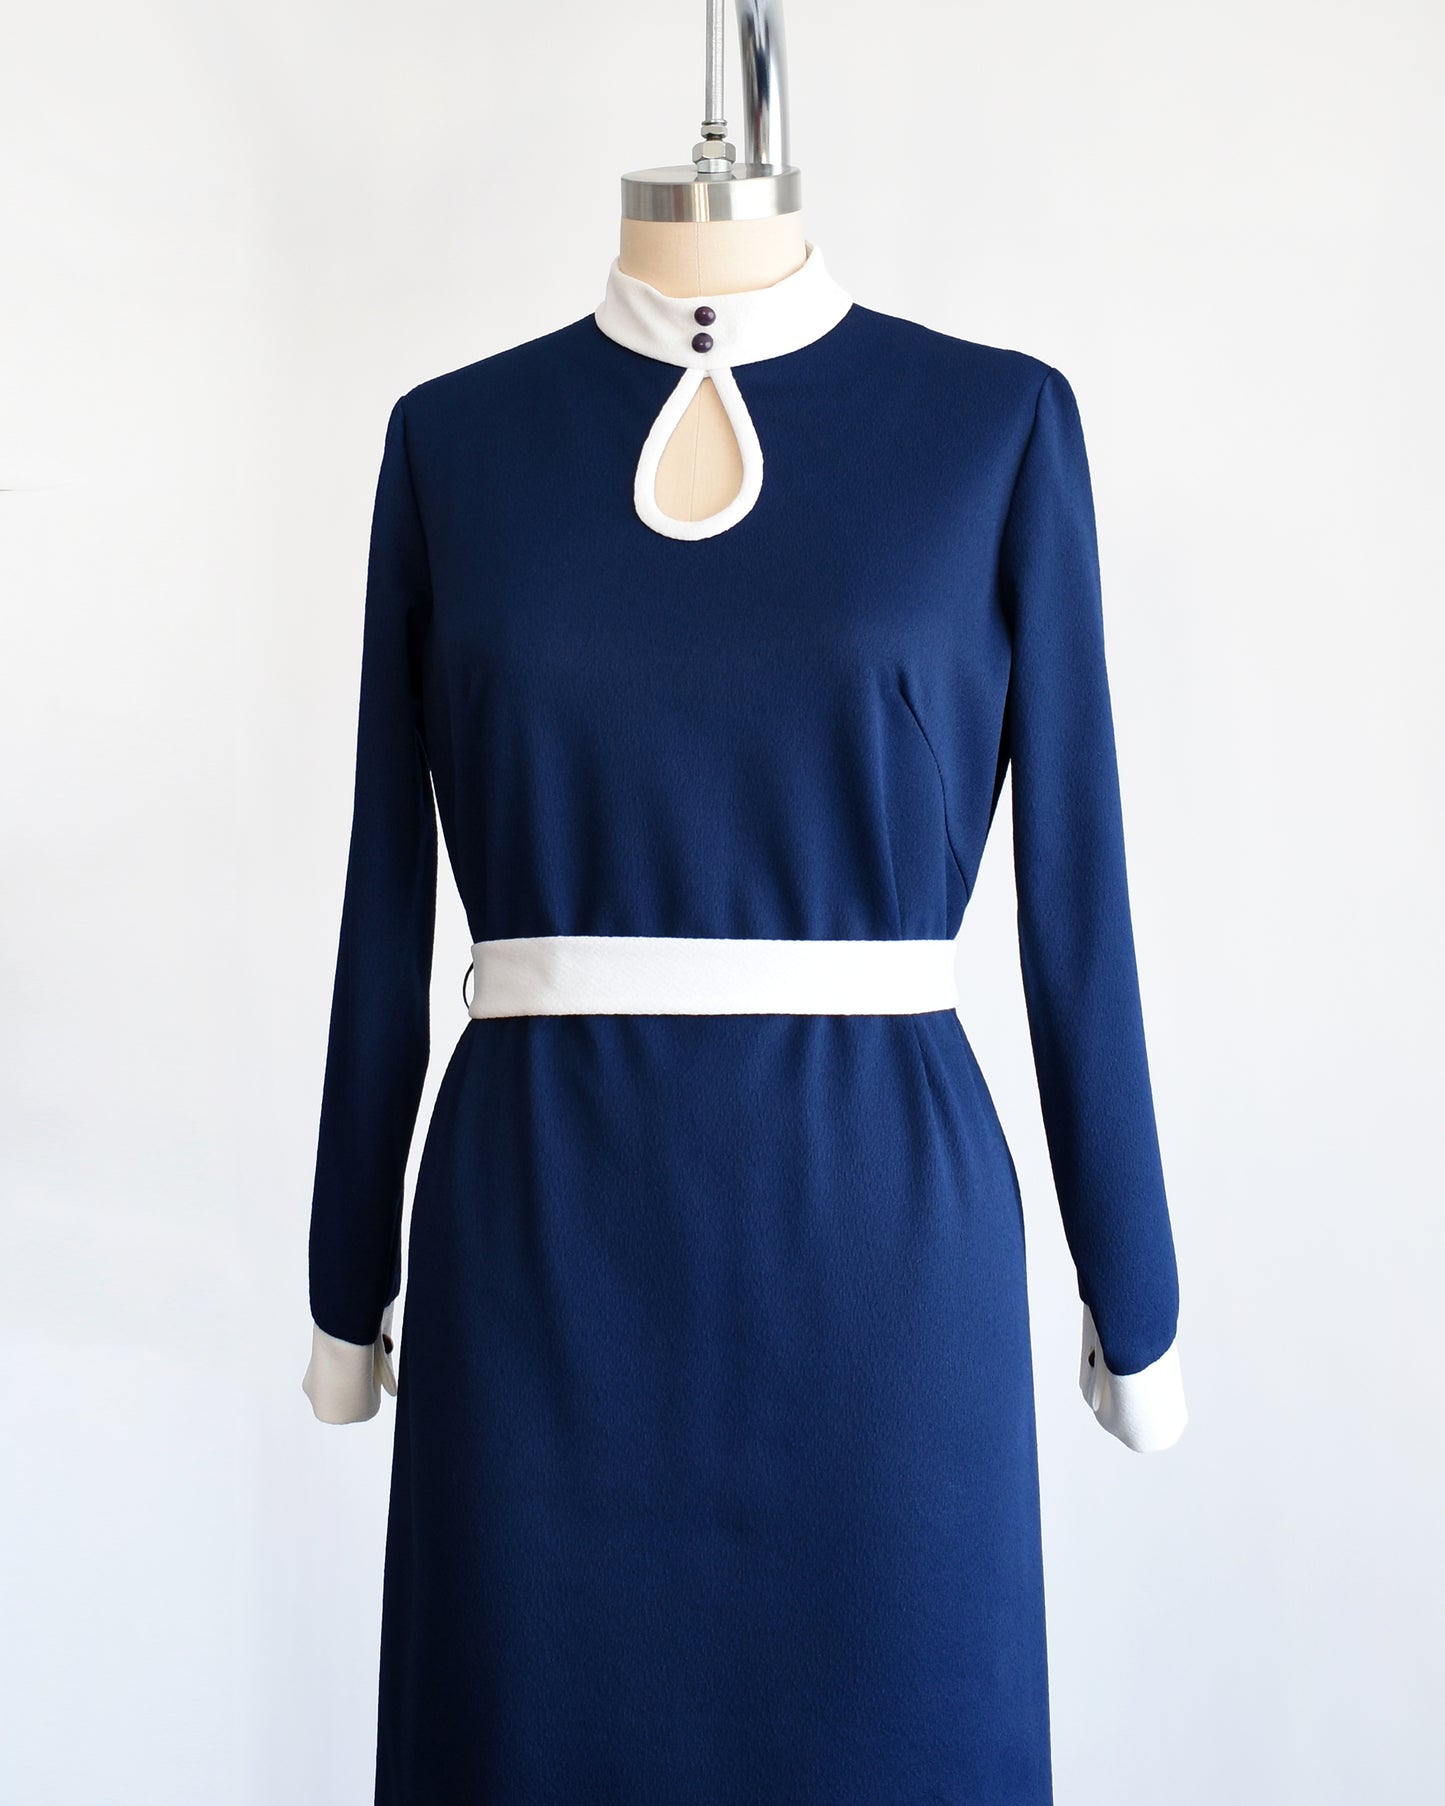 Side front view of a late 1960s to early 1970s navy and white mod dress with white belt